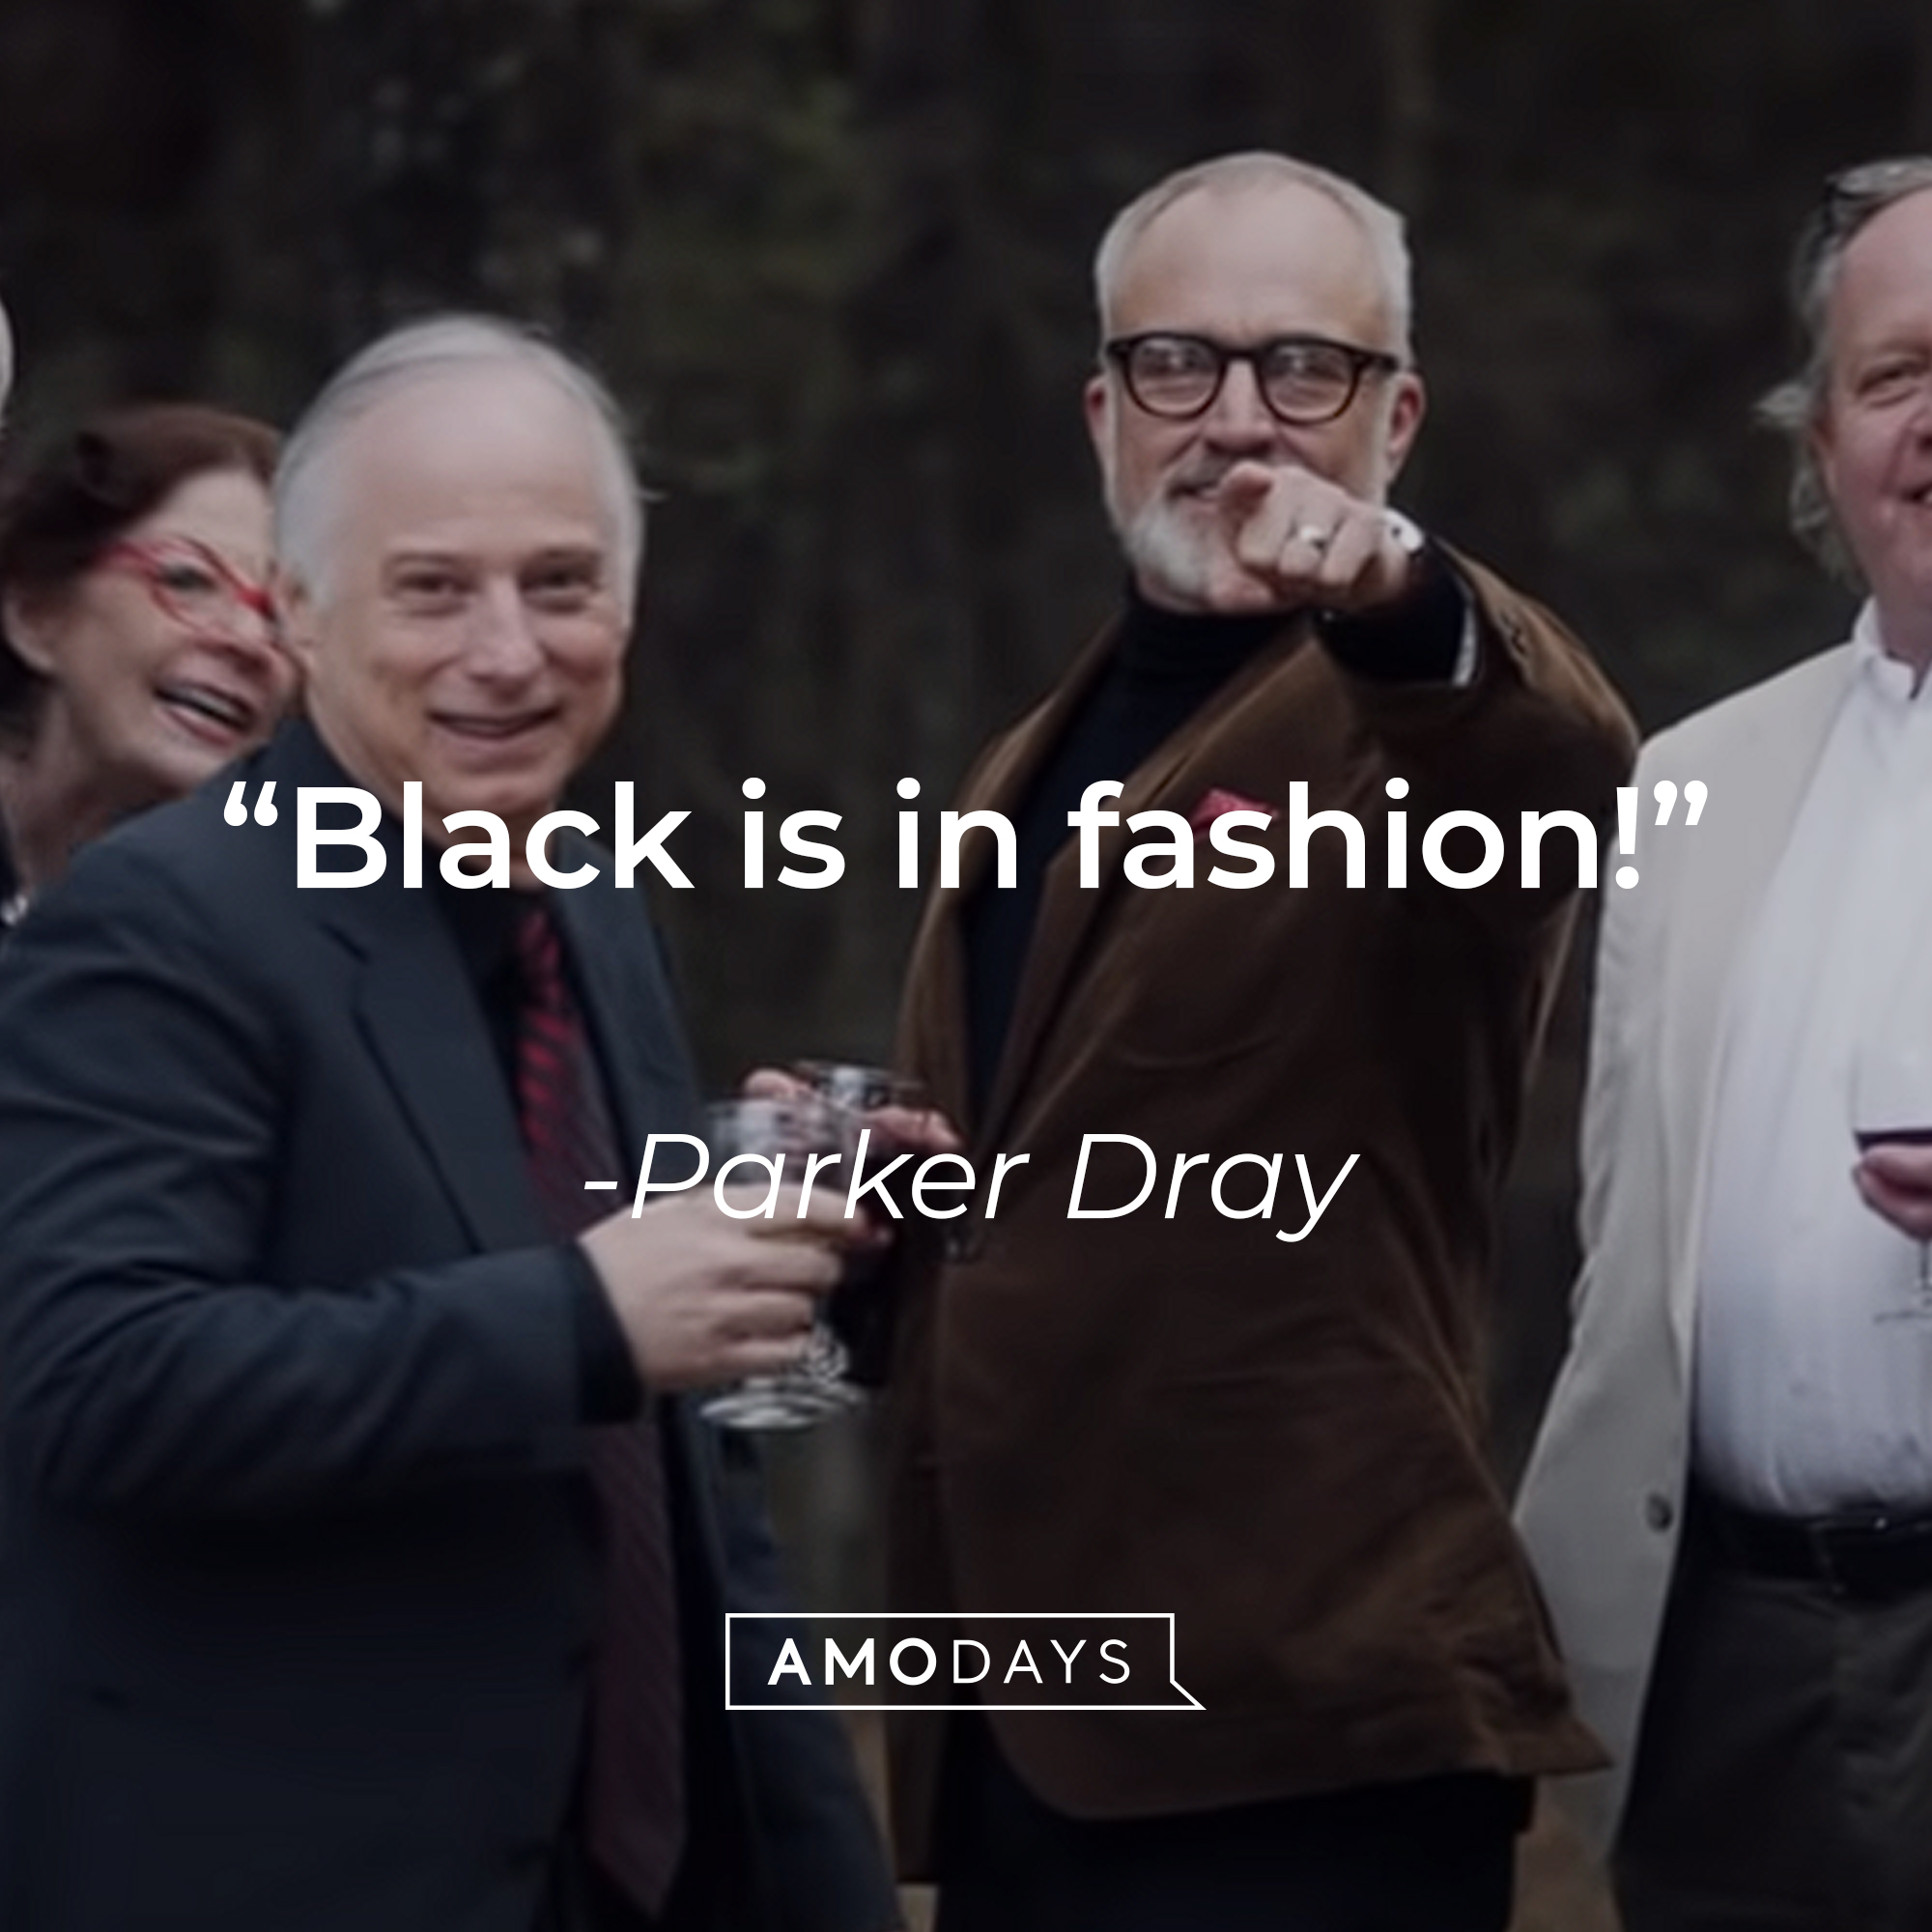 An image of Dean Armitage with another individual with Parker Dray’s quote: “Black is in fashion!”| Source: youtube.com/UniversalpicturesIta